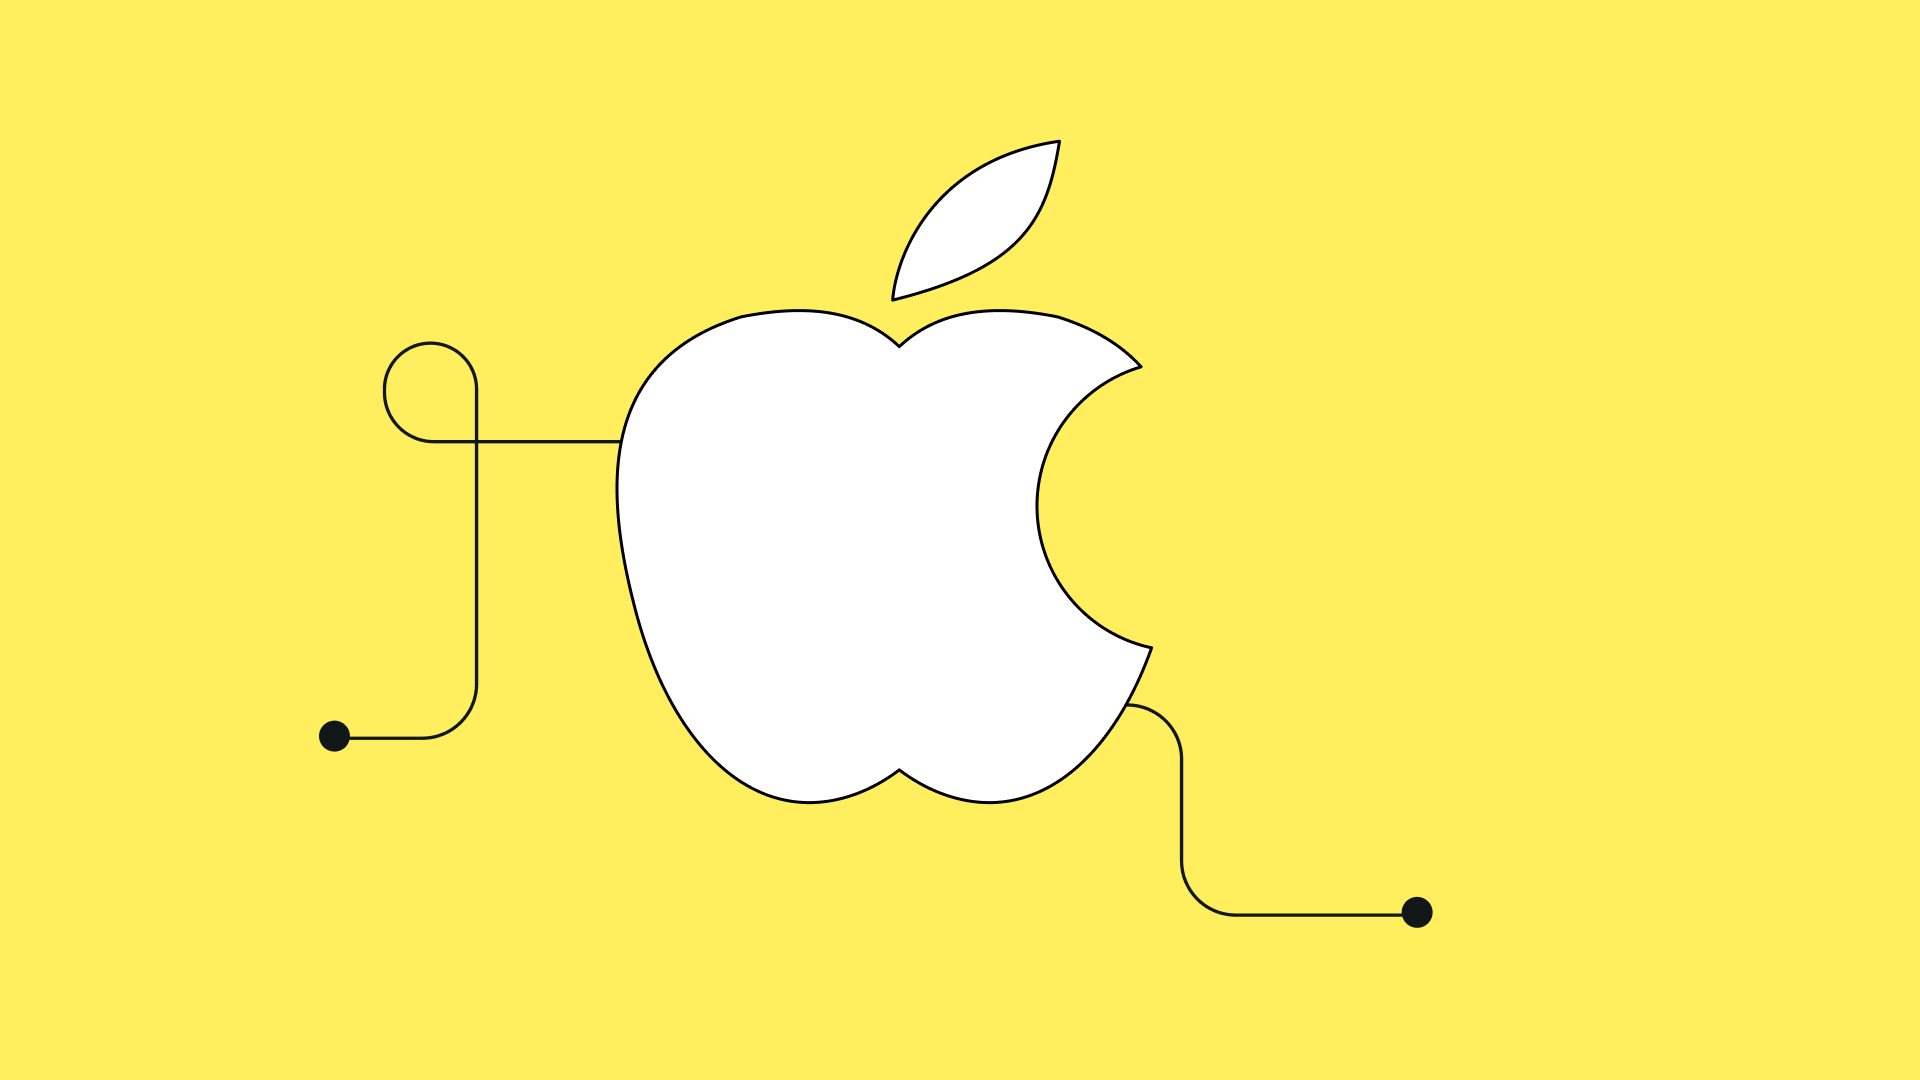 The Evolution of the Apple Logo and Its Meaning